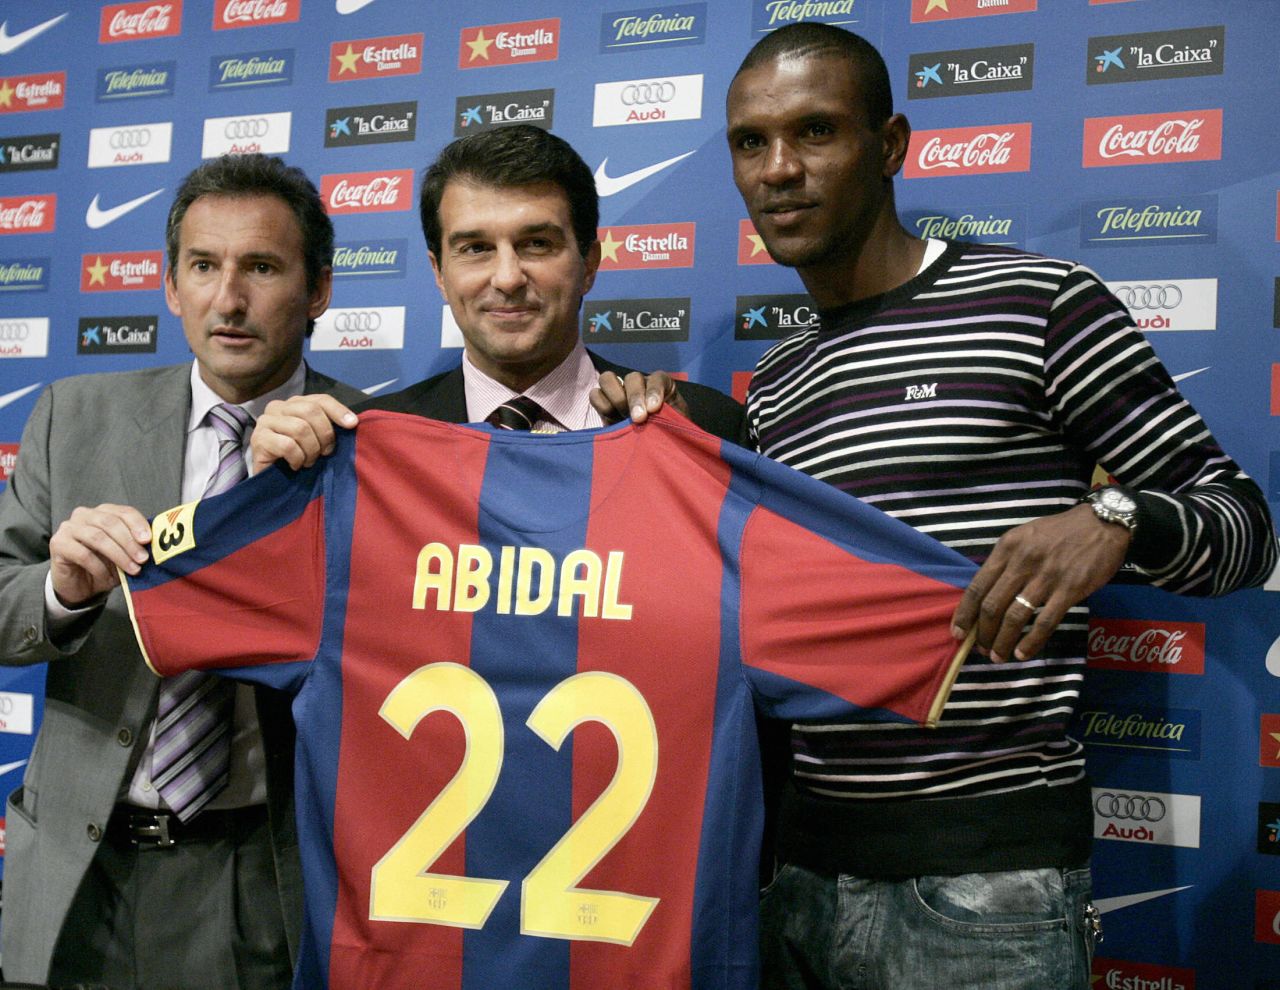 Abidal moved to the Camp Nou in 2007, having previously played for French champions Lyon, Lille and Monaco in his homeland. In January he signed a one-year contract extension until mid-2013.